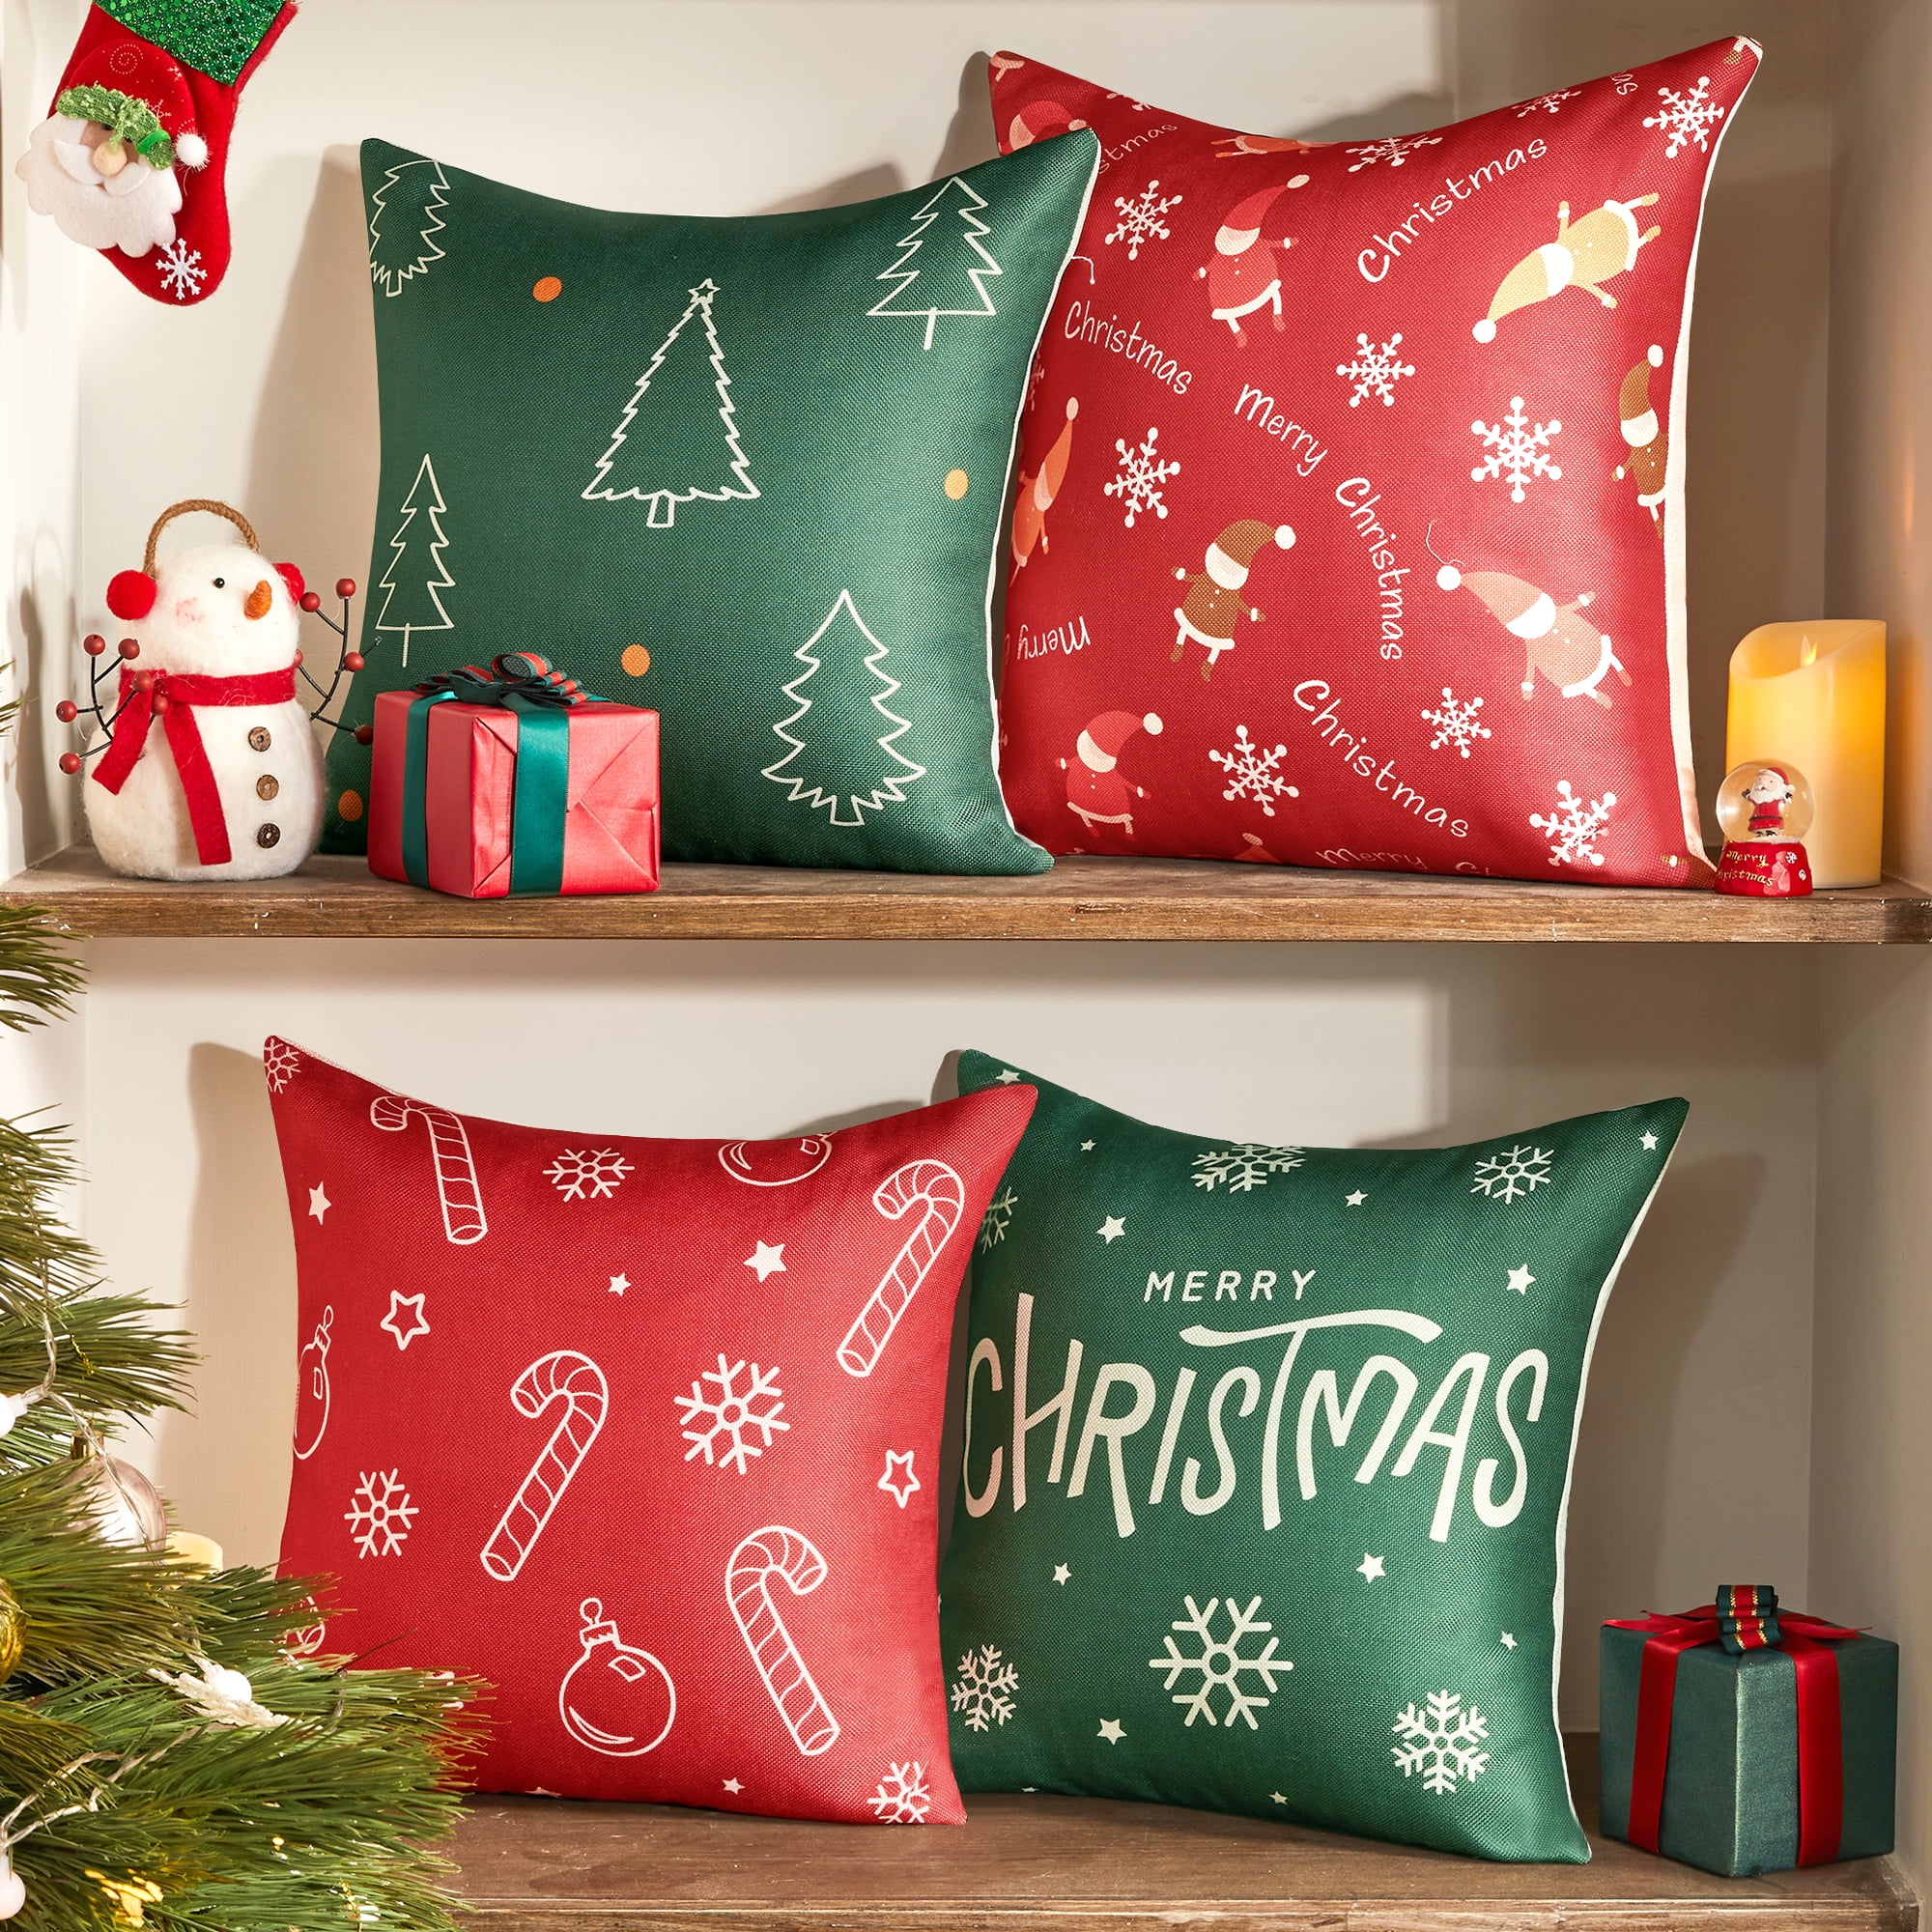 4-Pack Christmas Square Pillow Covers,18x18 Inches Velvet Touch